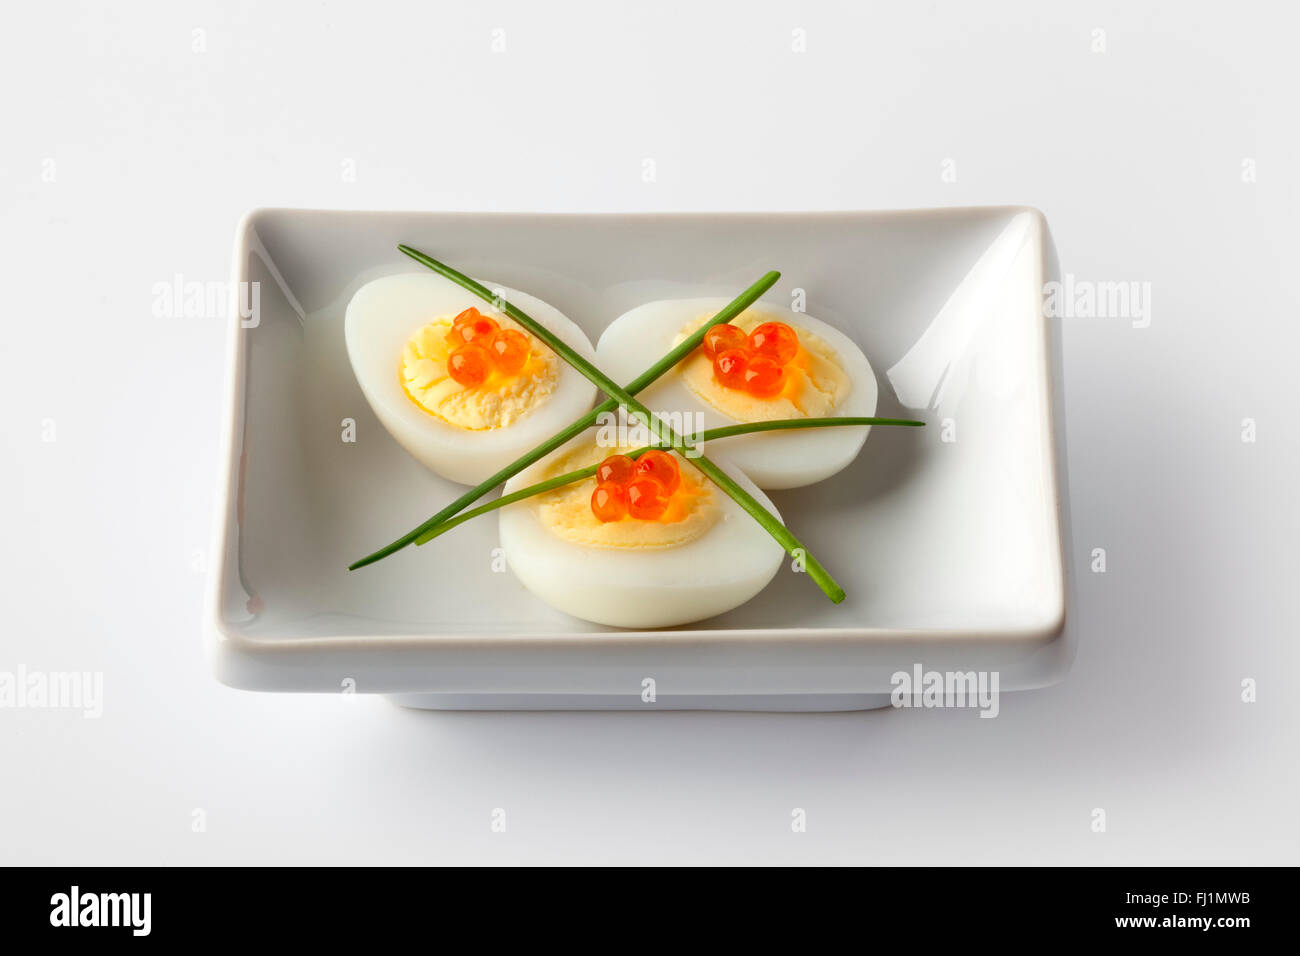 Boiled quail eggs with trout eggs and chive Stock Photo